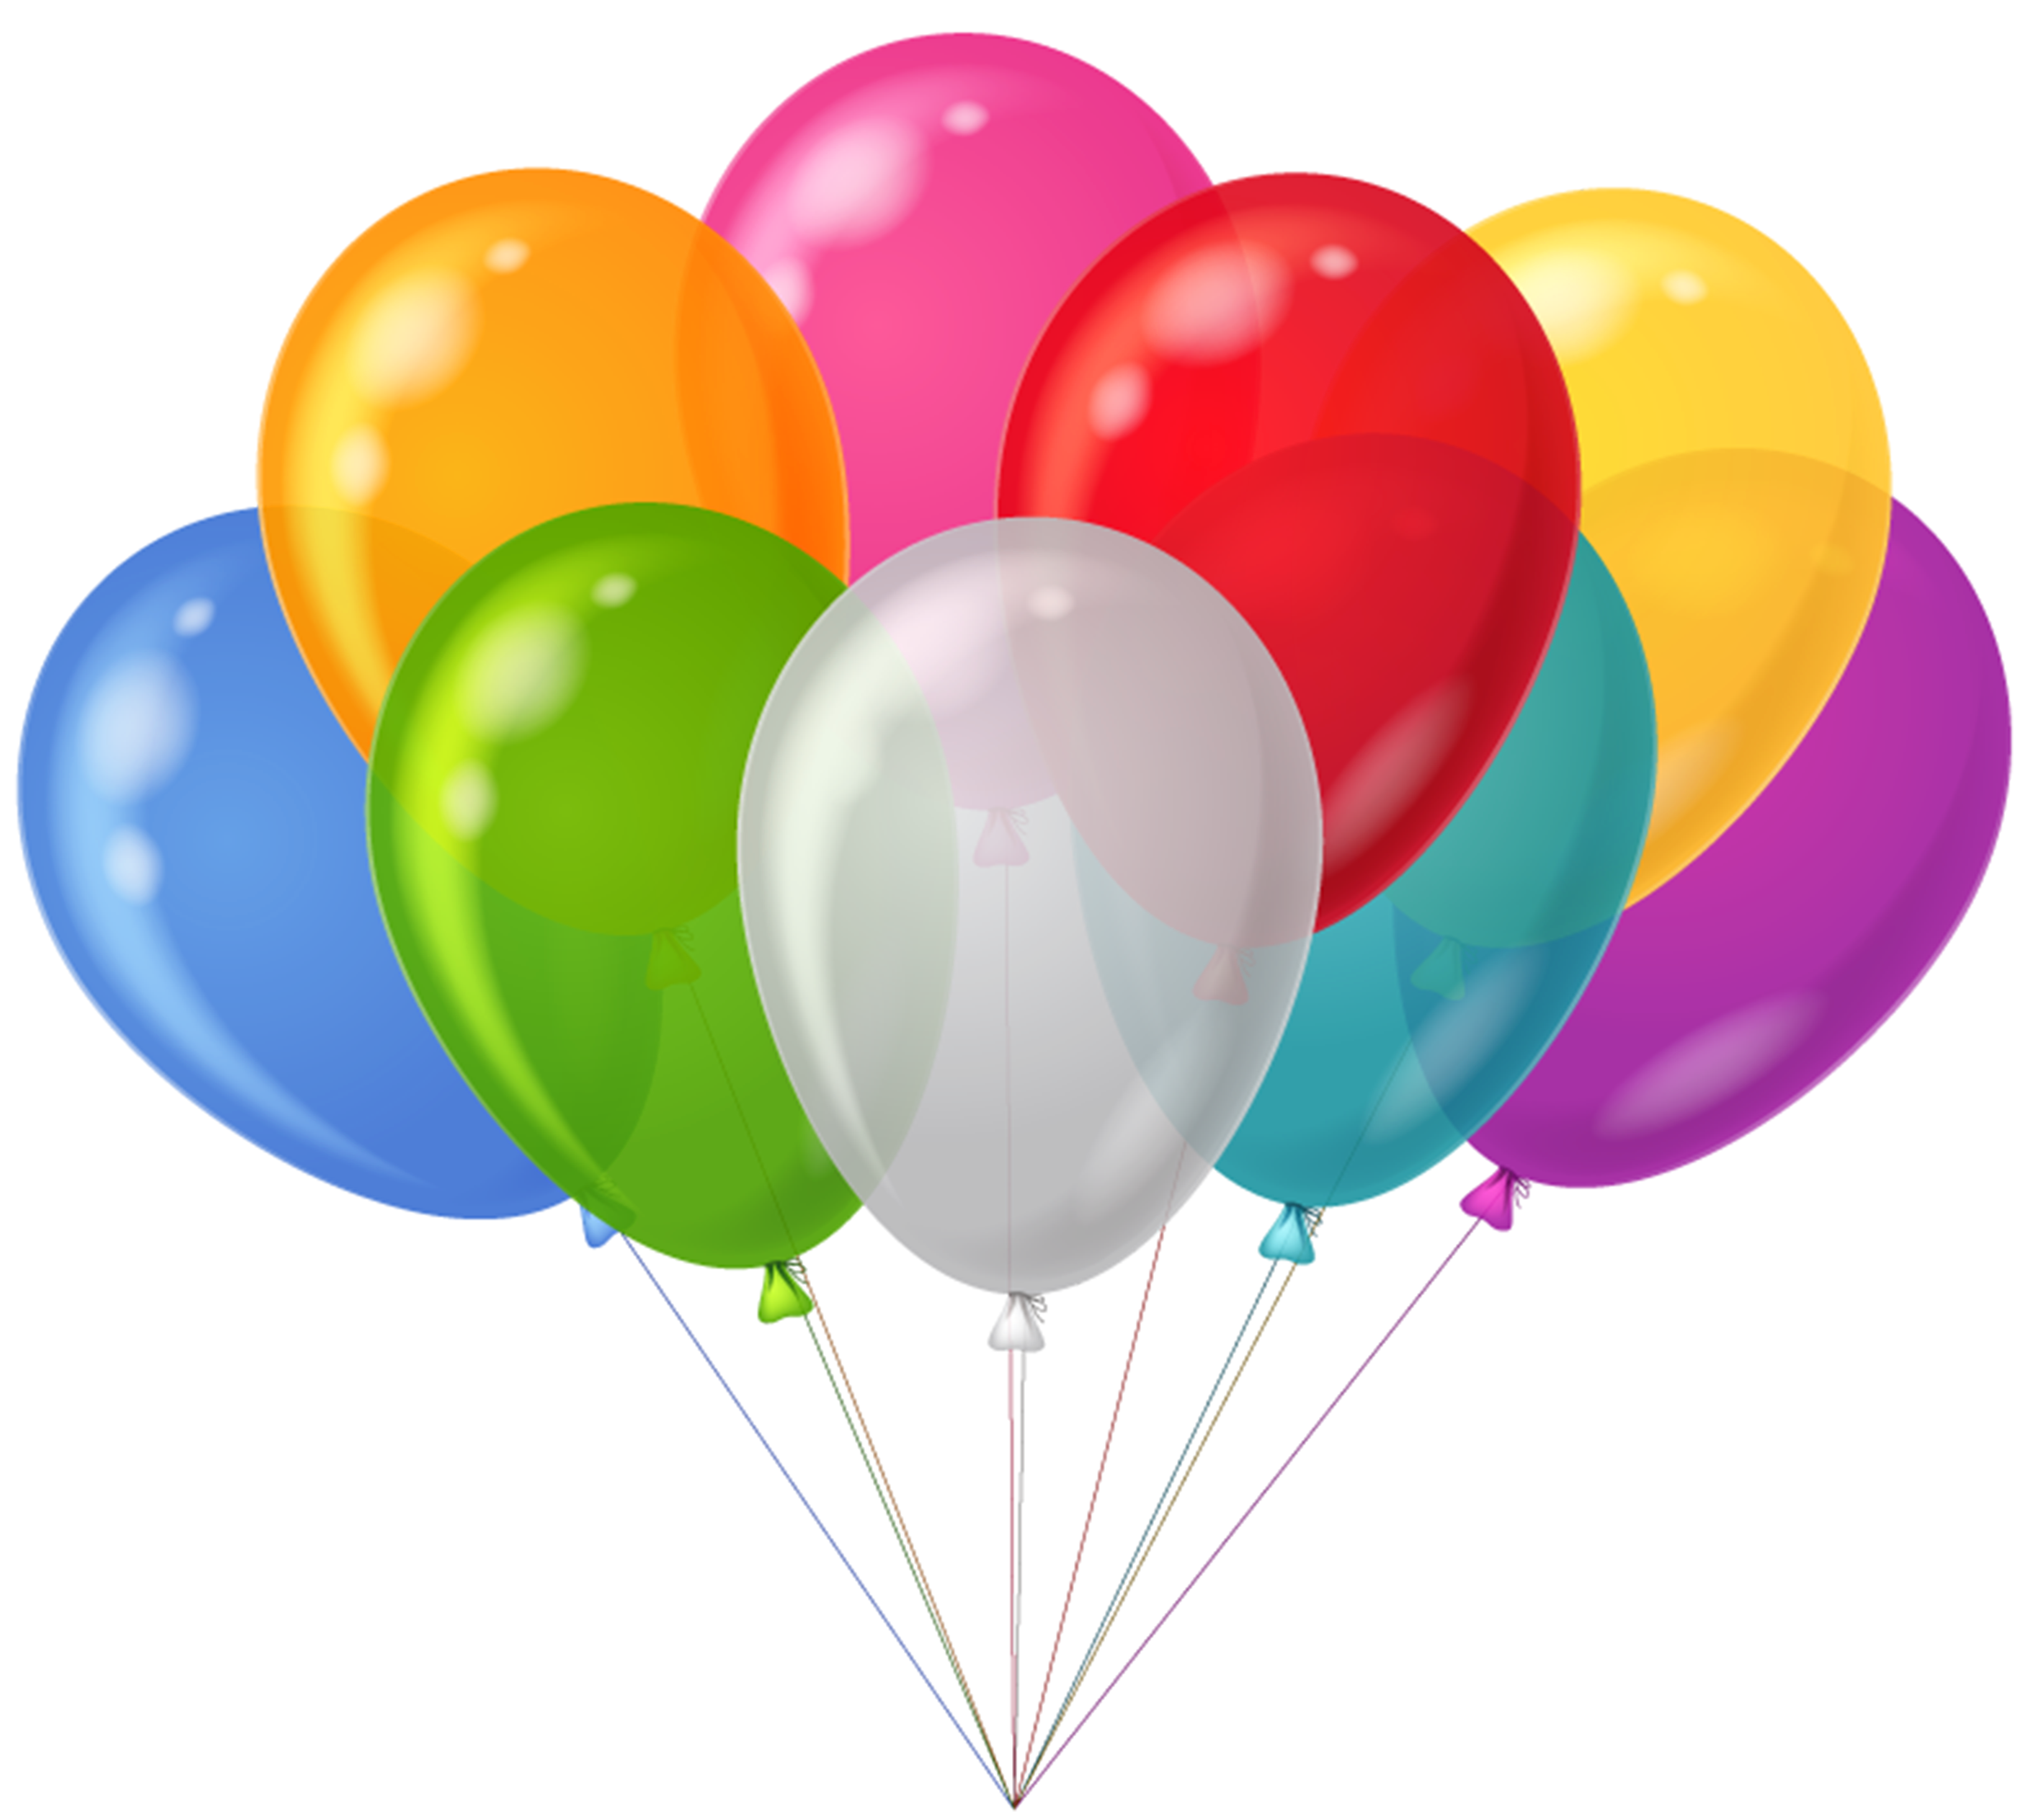 Balloons Images Collection (38+)